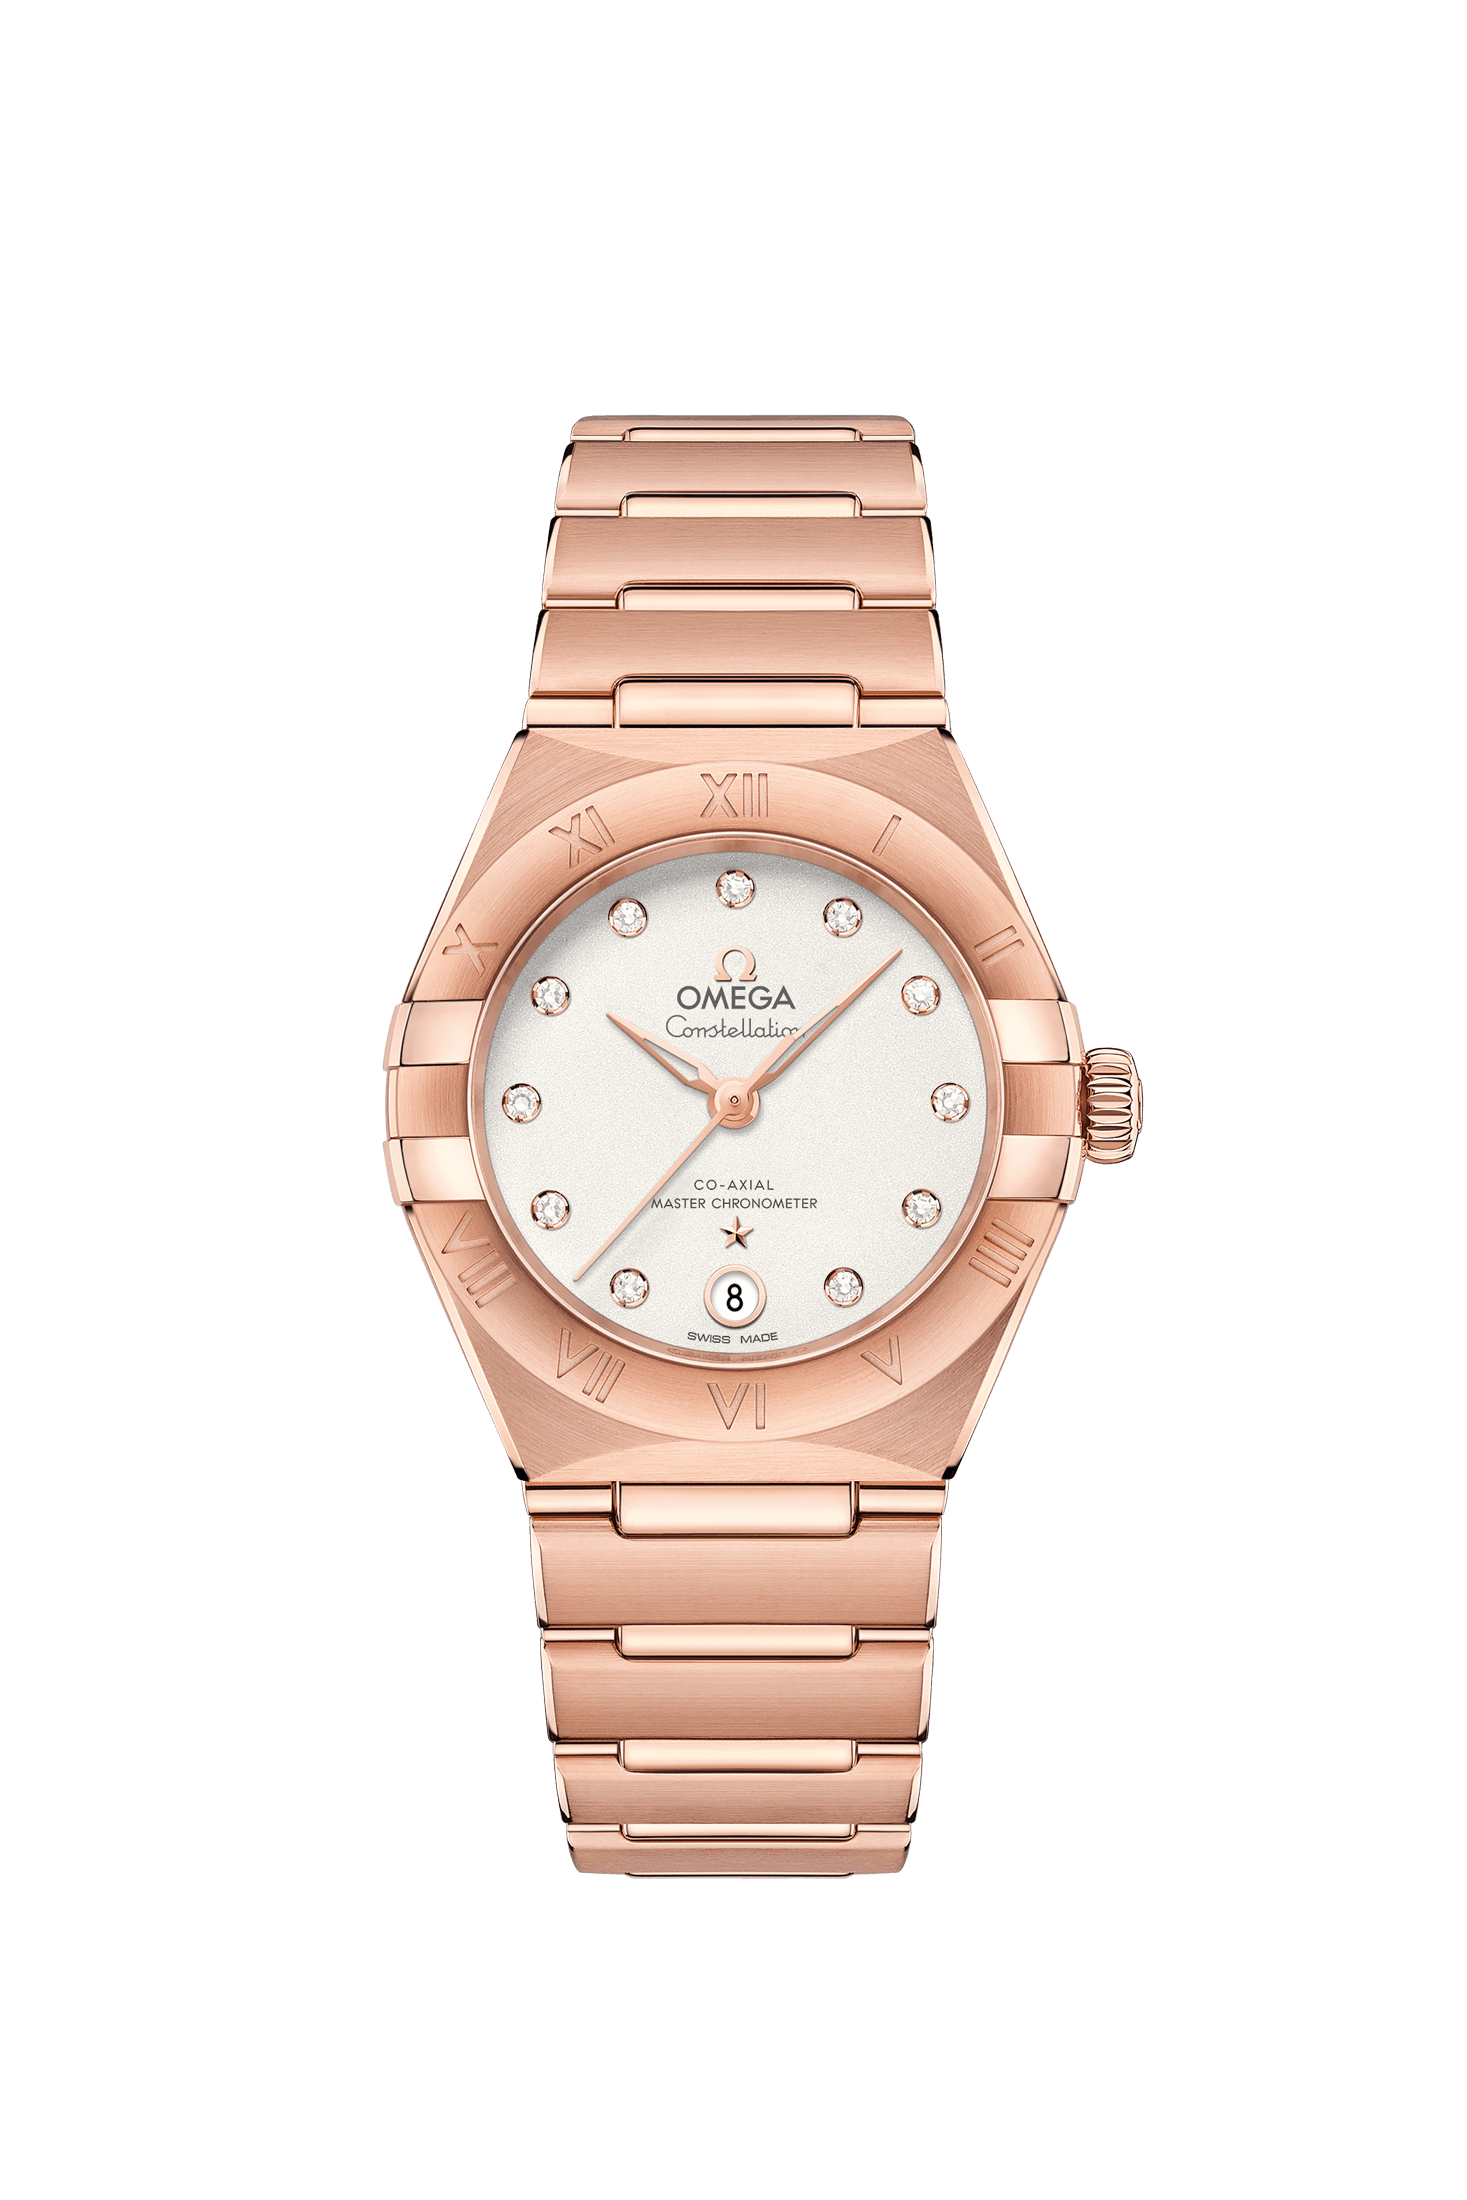 Ladies' watch  OMEGA, Constellation Co Axial Master Chronometer / 29mm, SKU: 131.50.29.20.52.001 | watchapproach.com